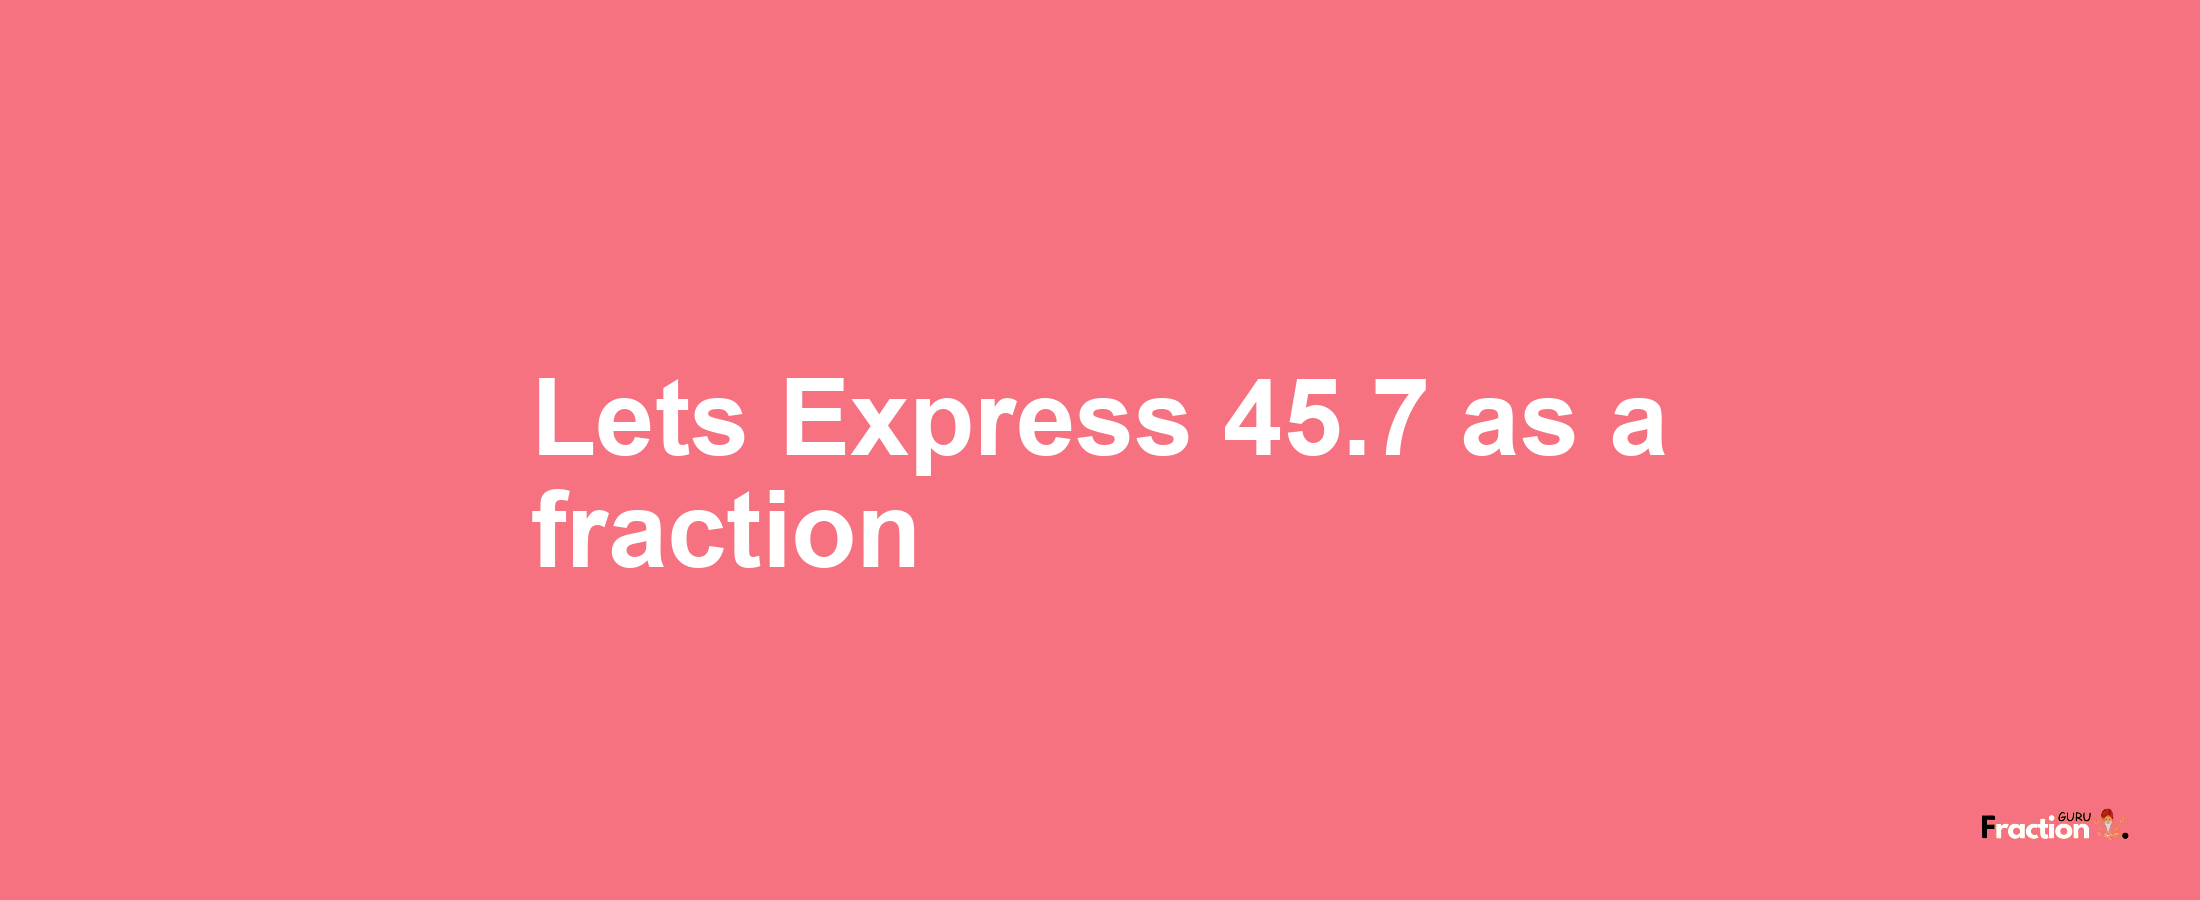 Lets Express 45.7 as afraction